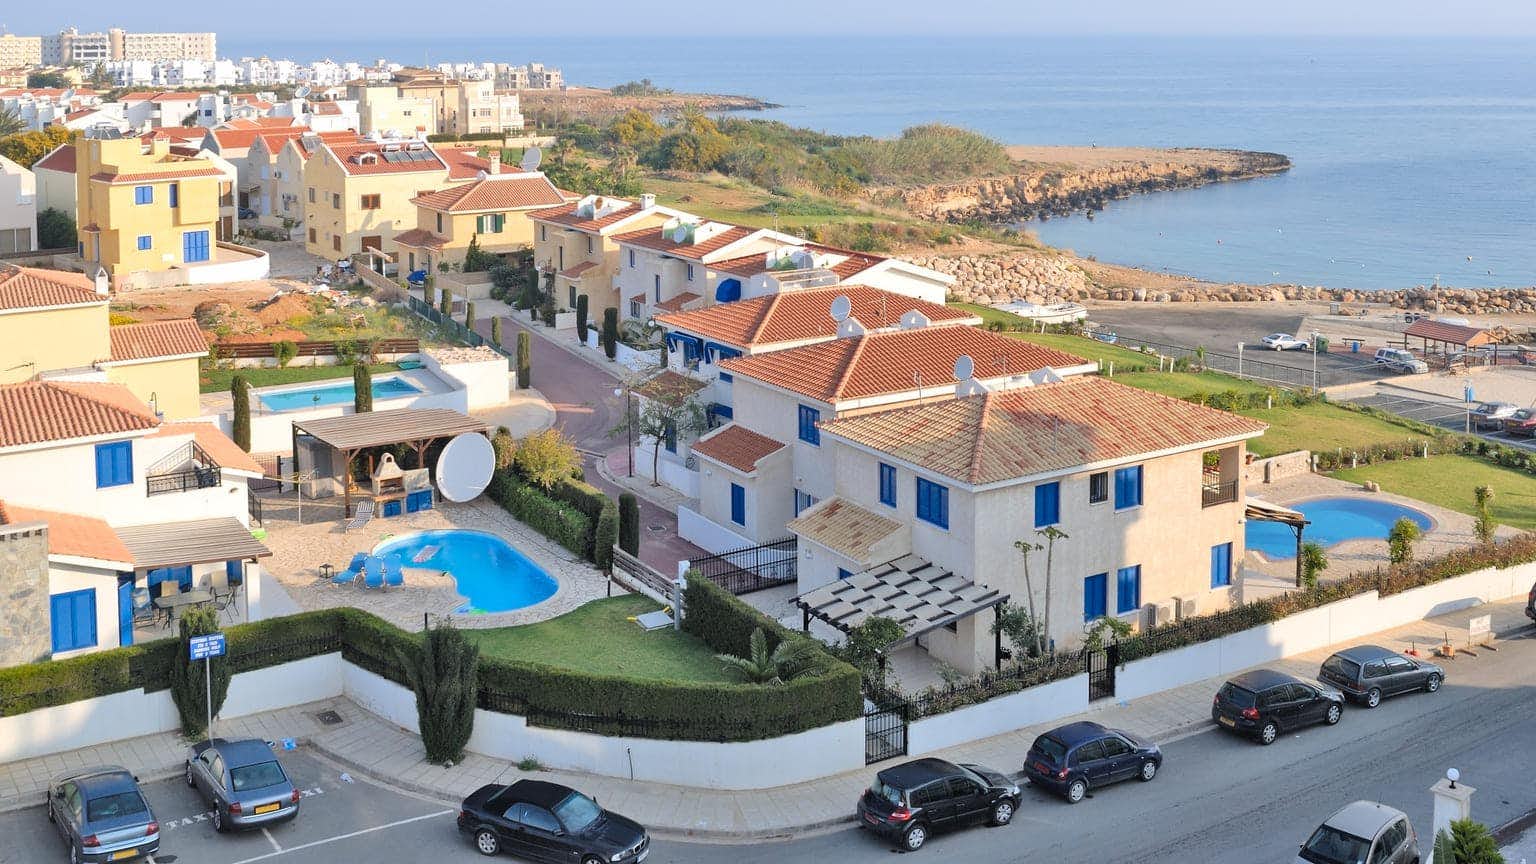 Real estate maintenance costs in Cyprus: the price of owning a place on Aphrodite’s island